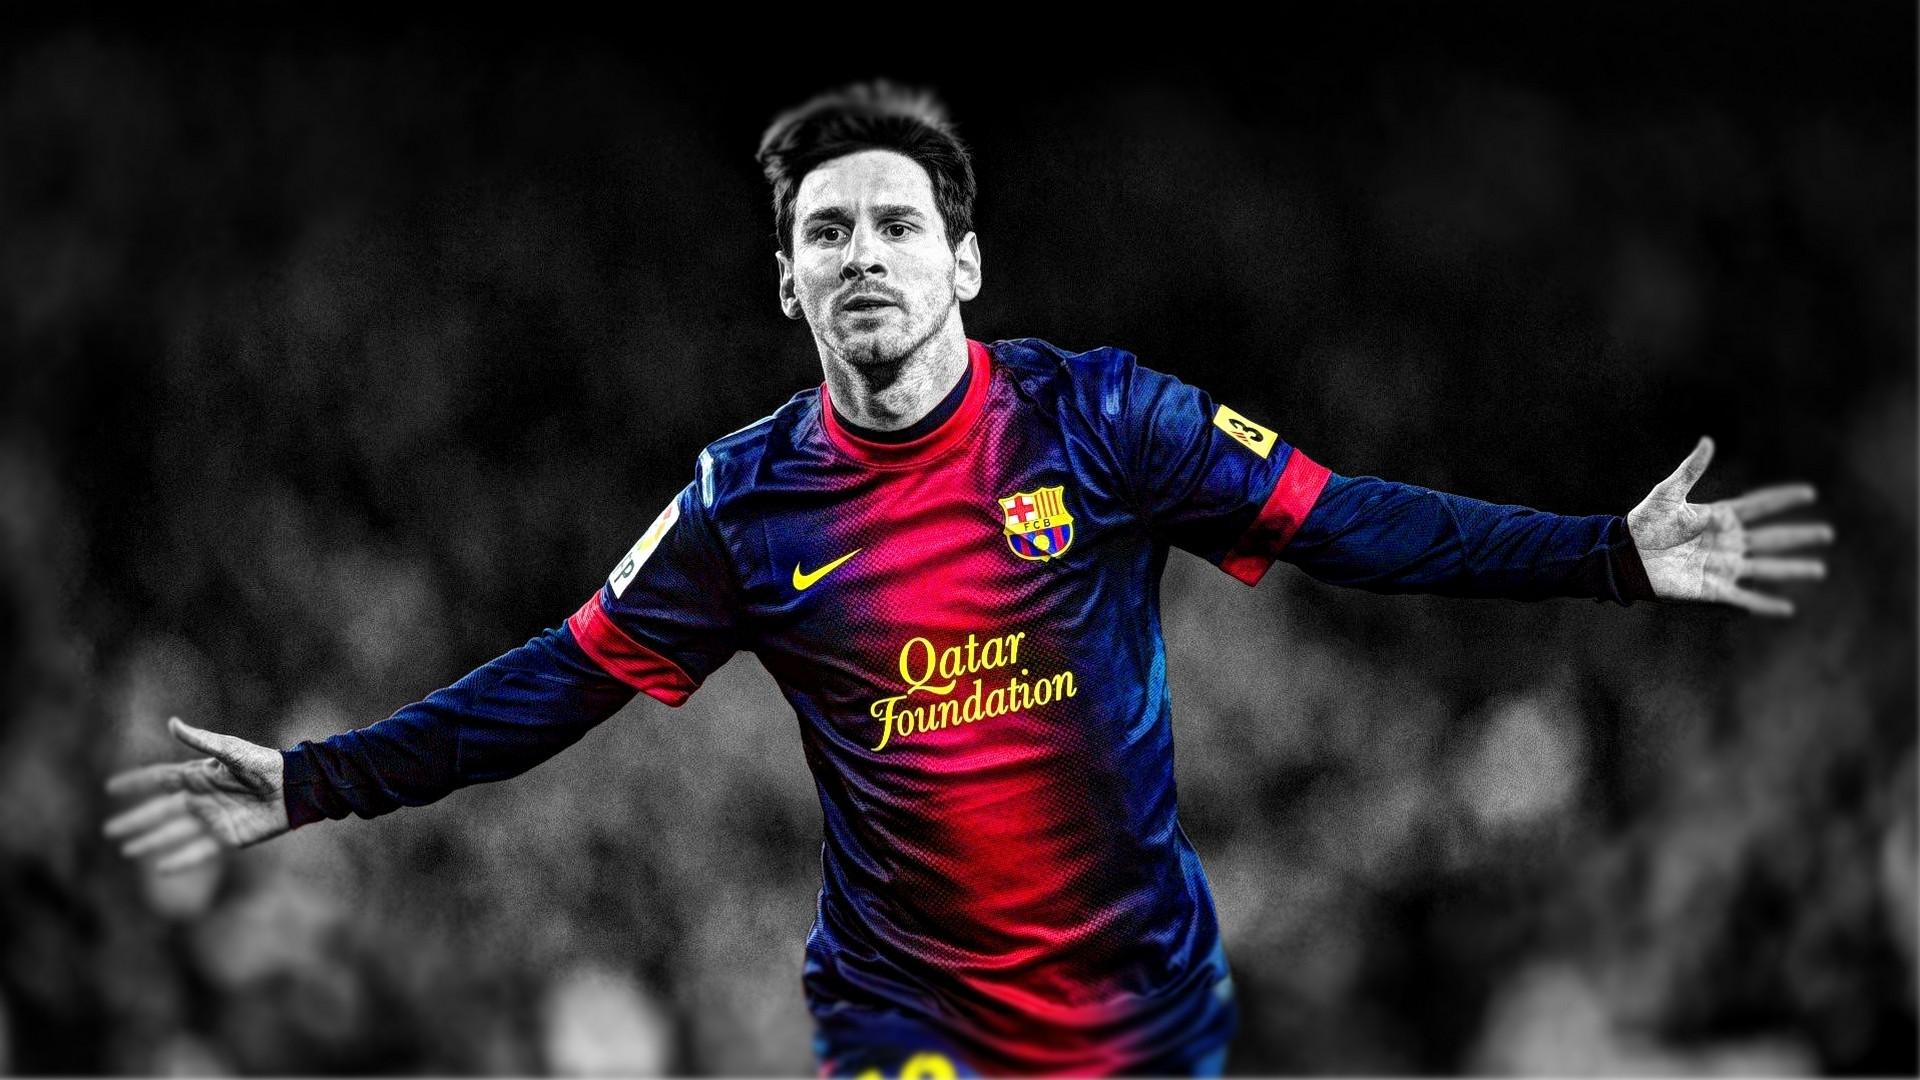 Messi 4K wallpaper for your desktop or mobile screen free and easy to download